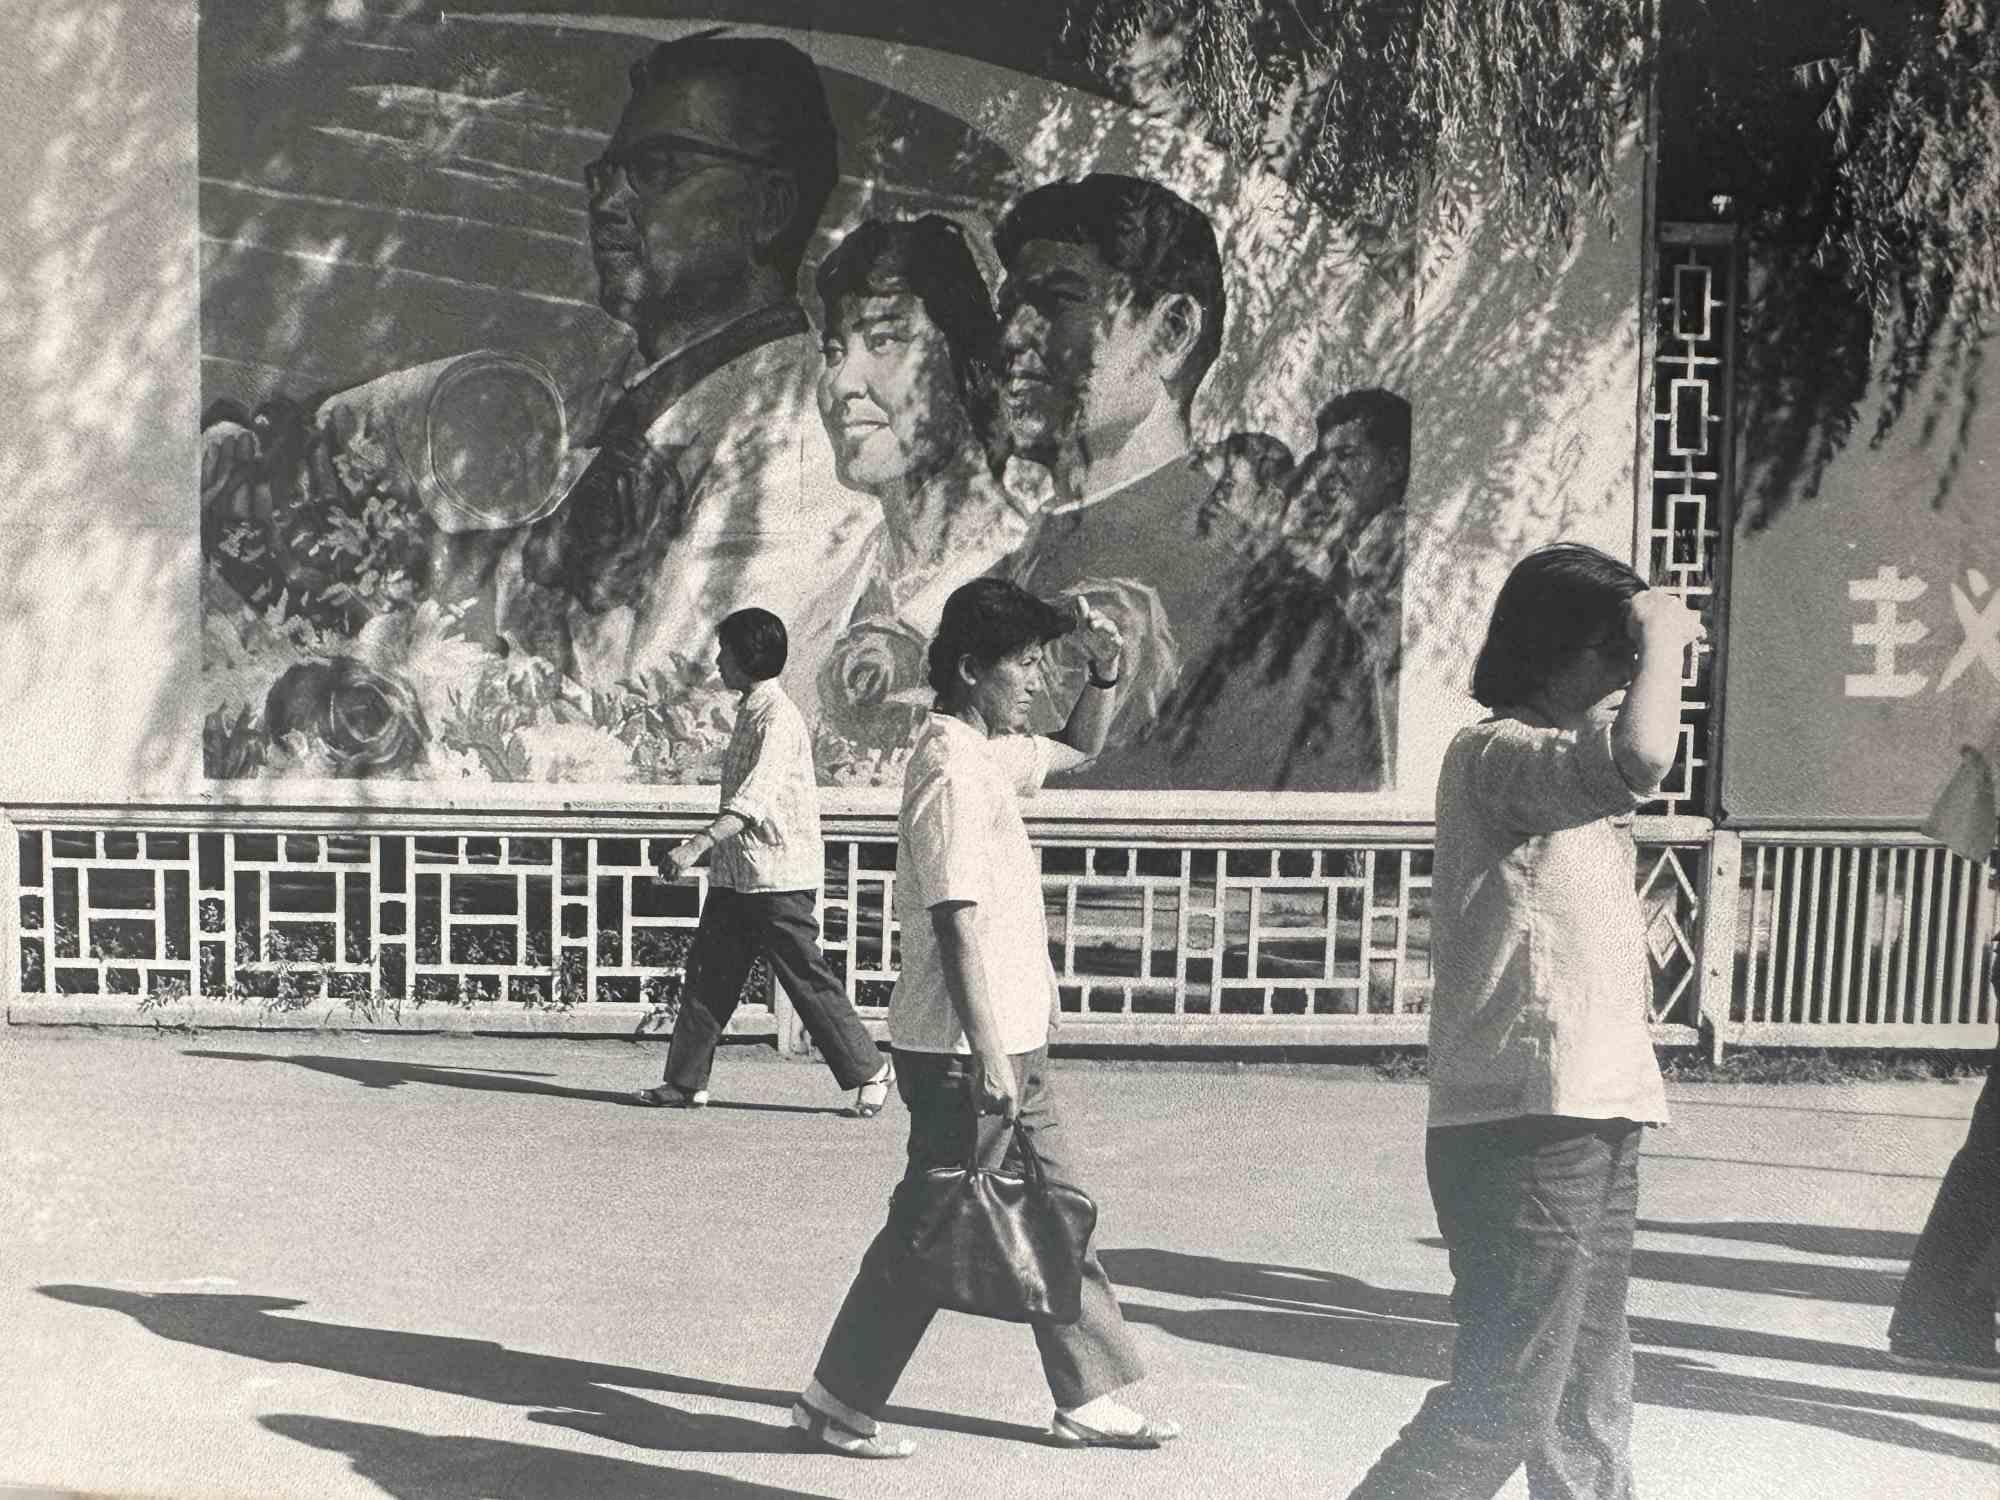 Historical Photo - China in 1980s - Vintage Photo